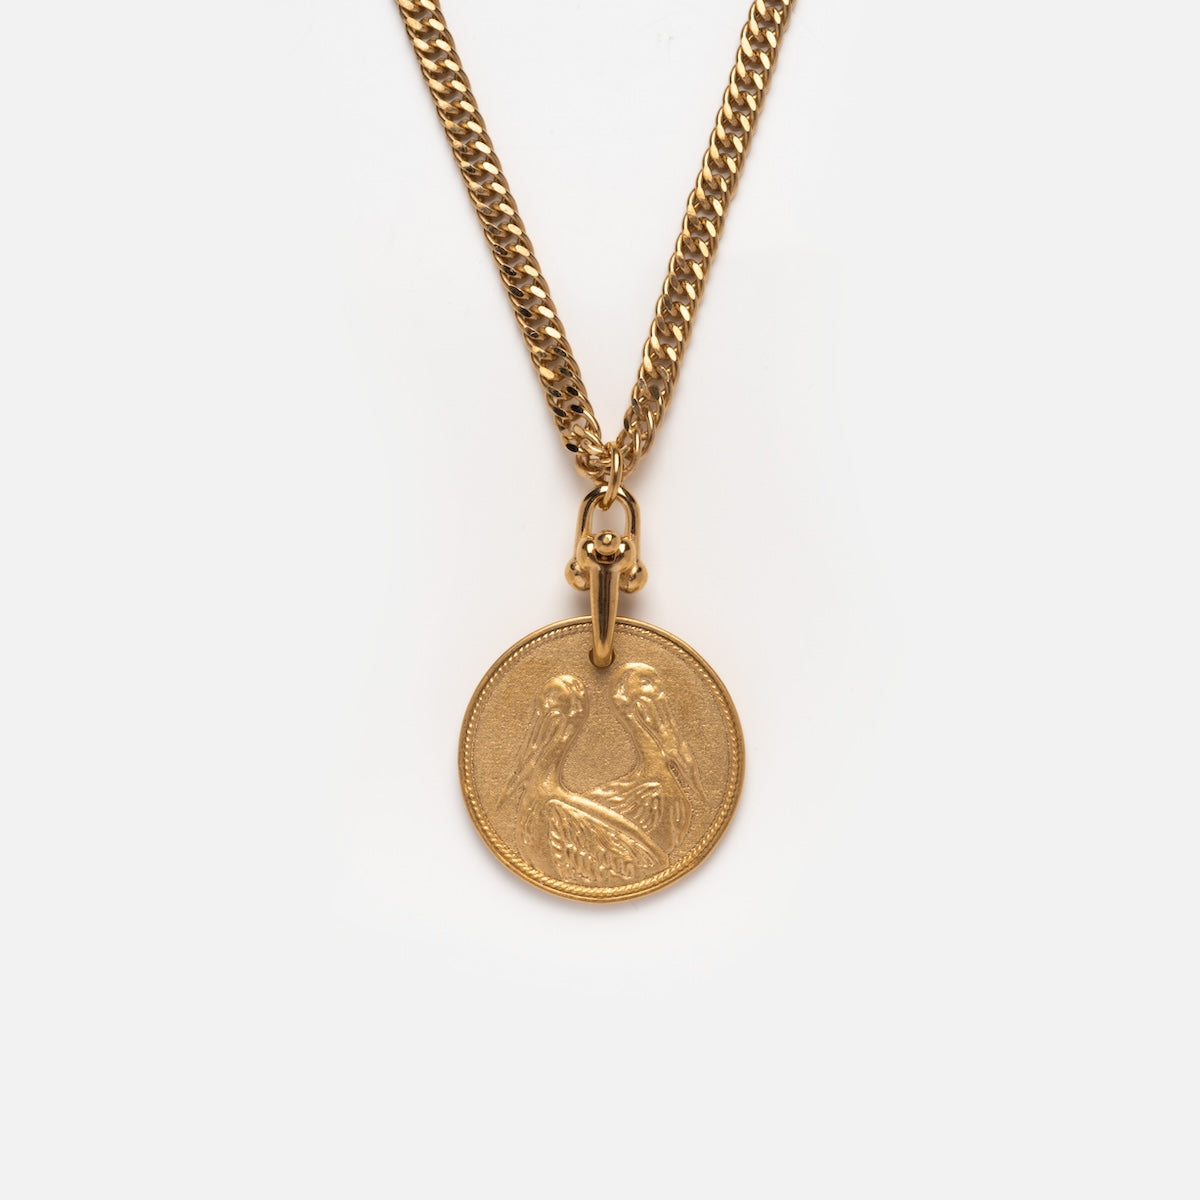 Heads or Tails Necklace